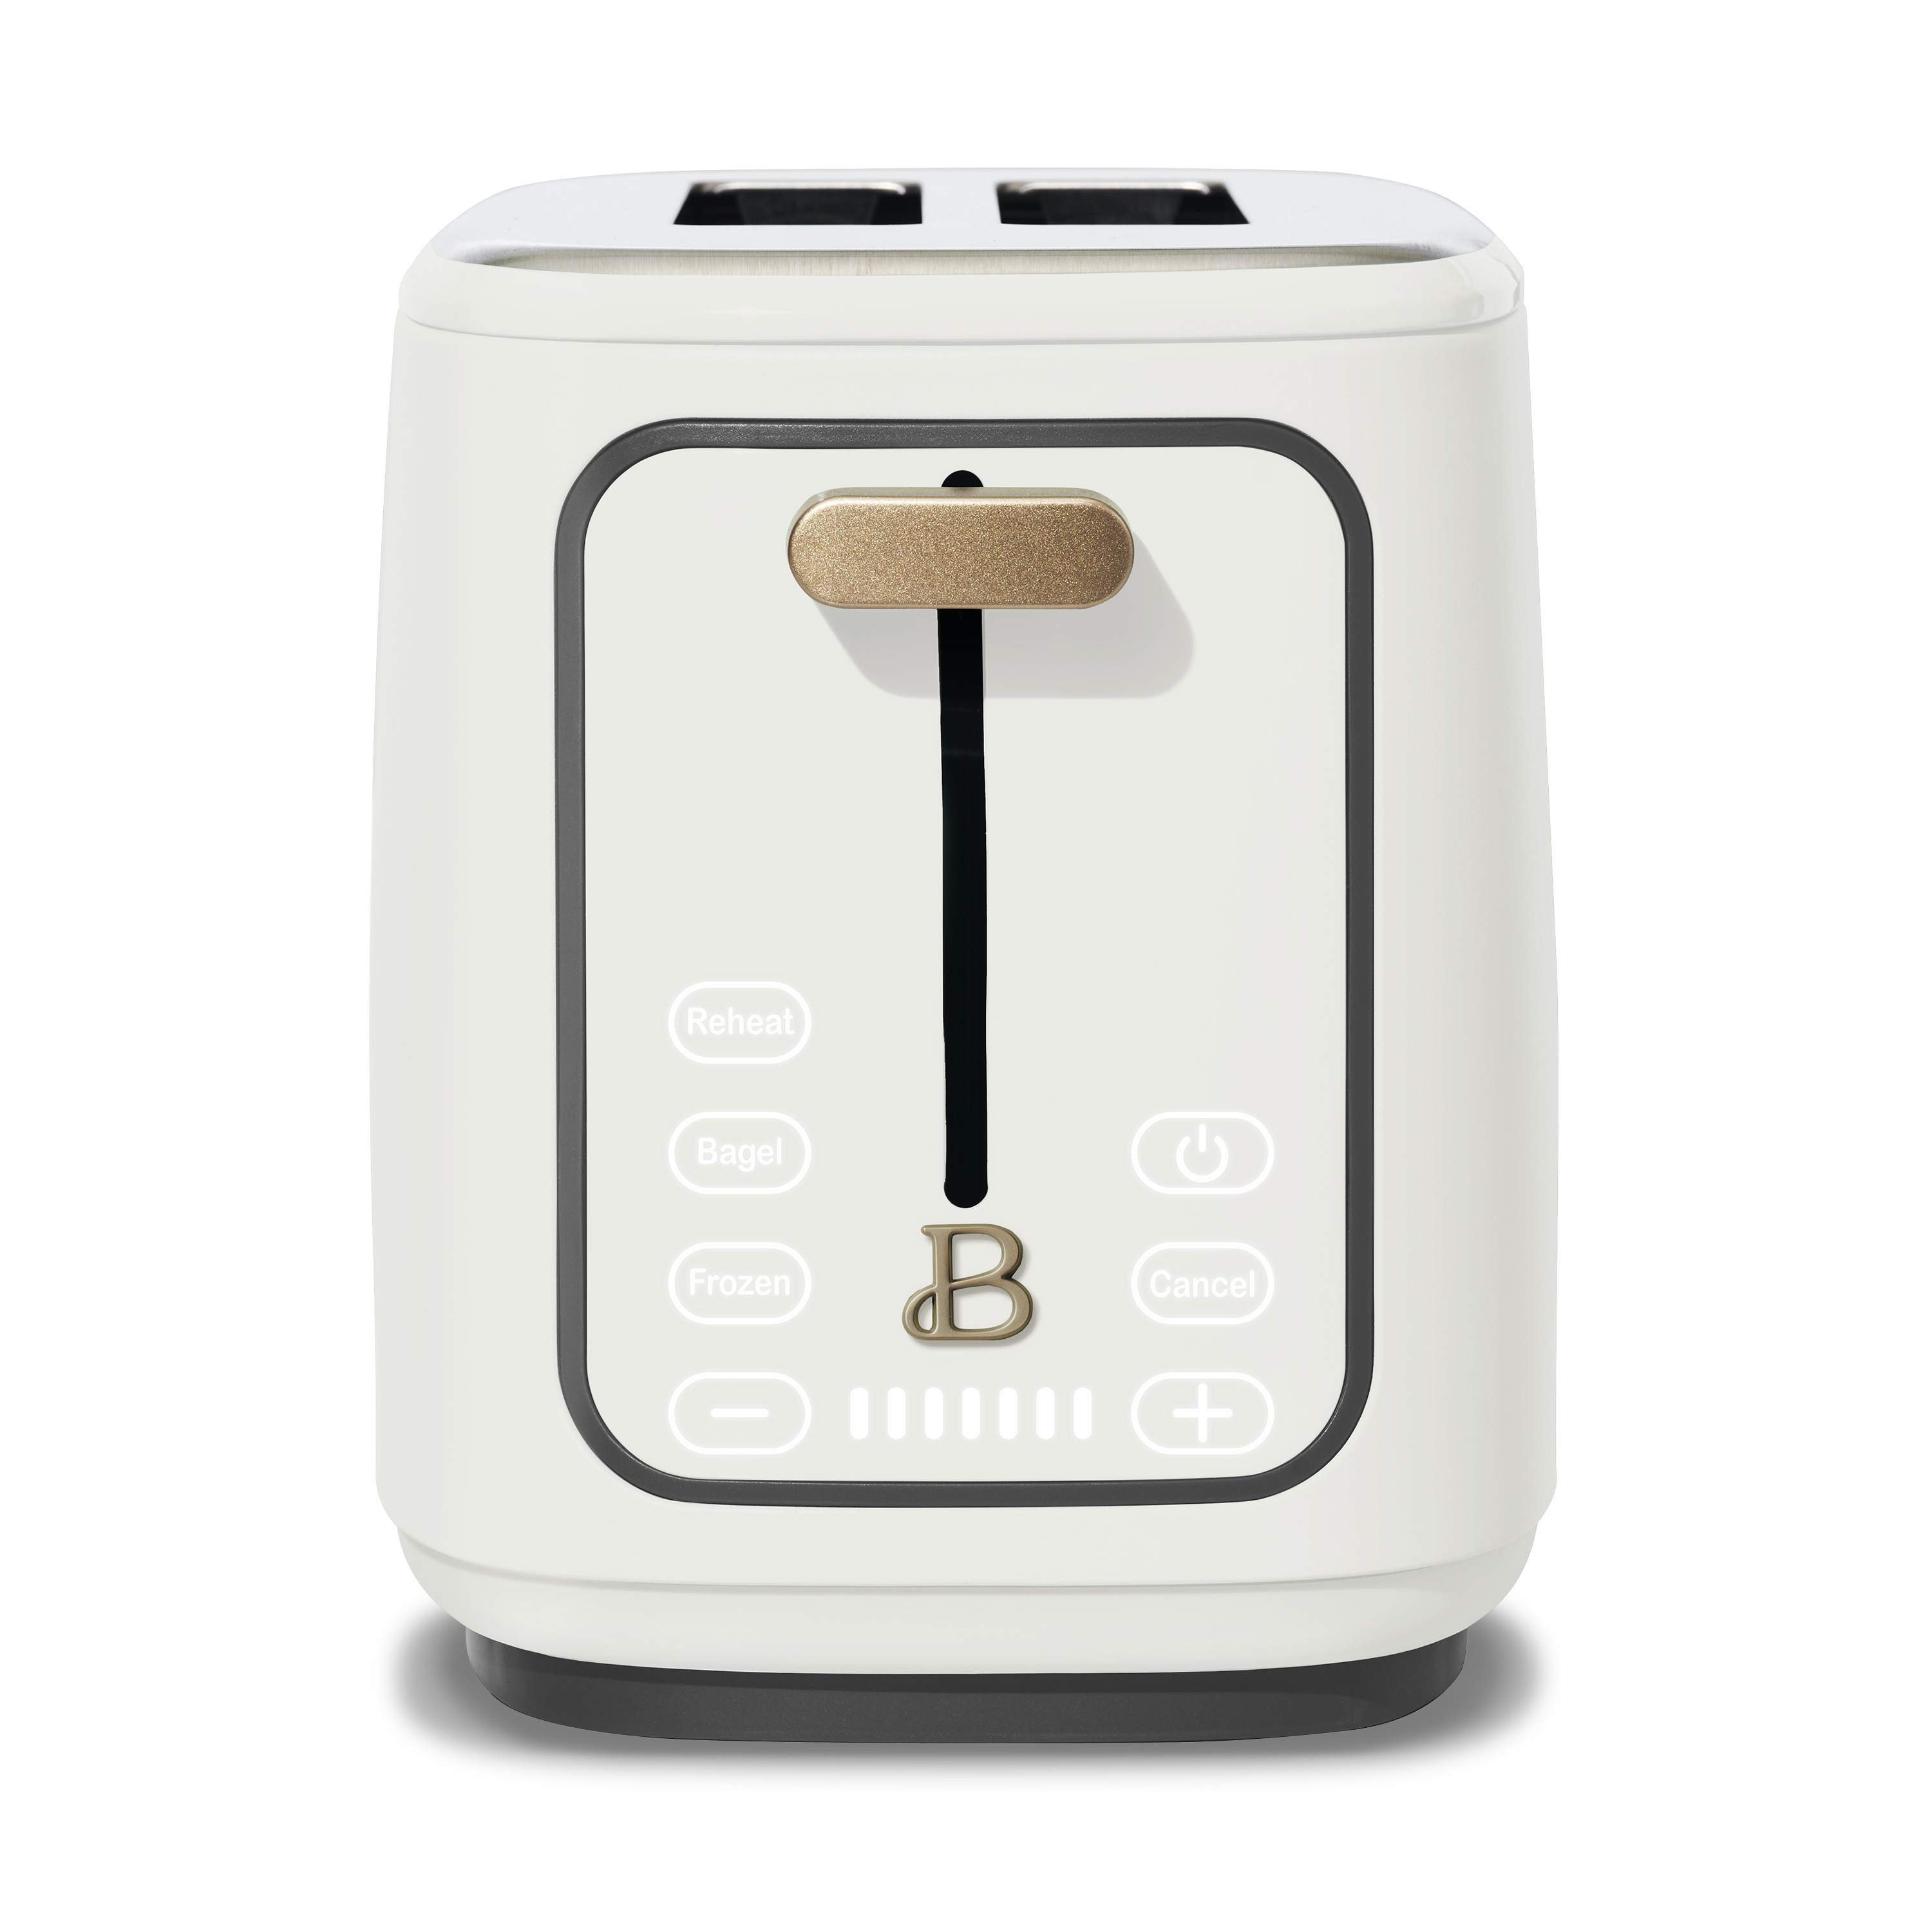 Beautiful 2 Slice Toaster with Touch-Activated Display, White Icing by Drew Barrymore - image 1 of 13